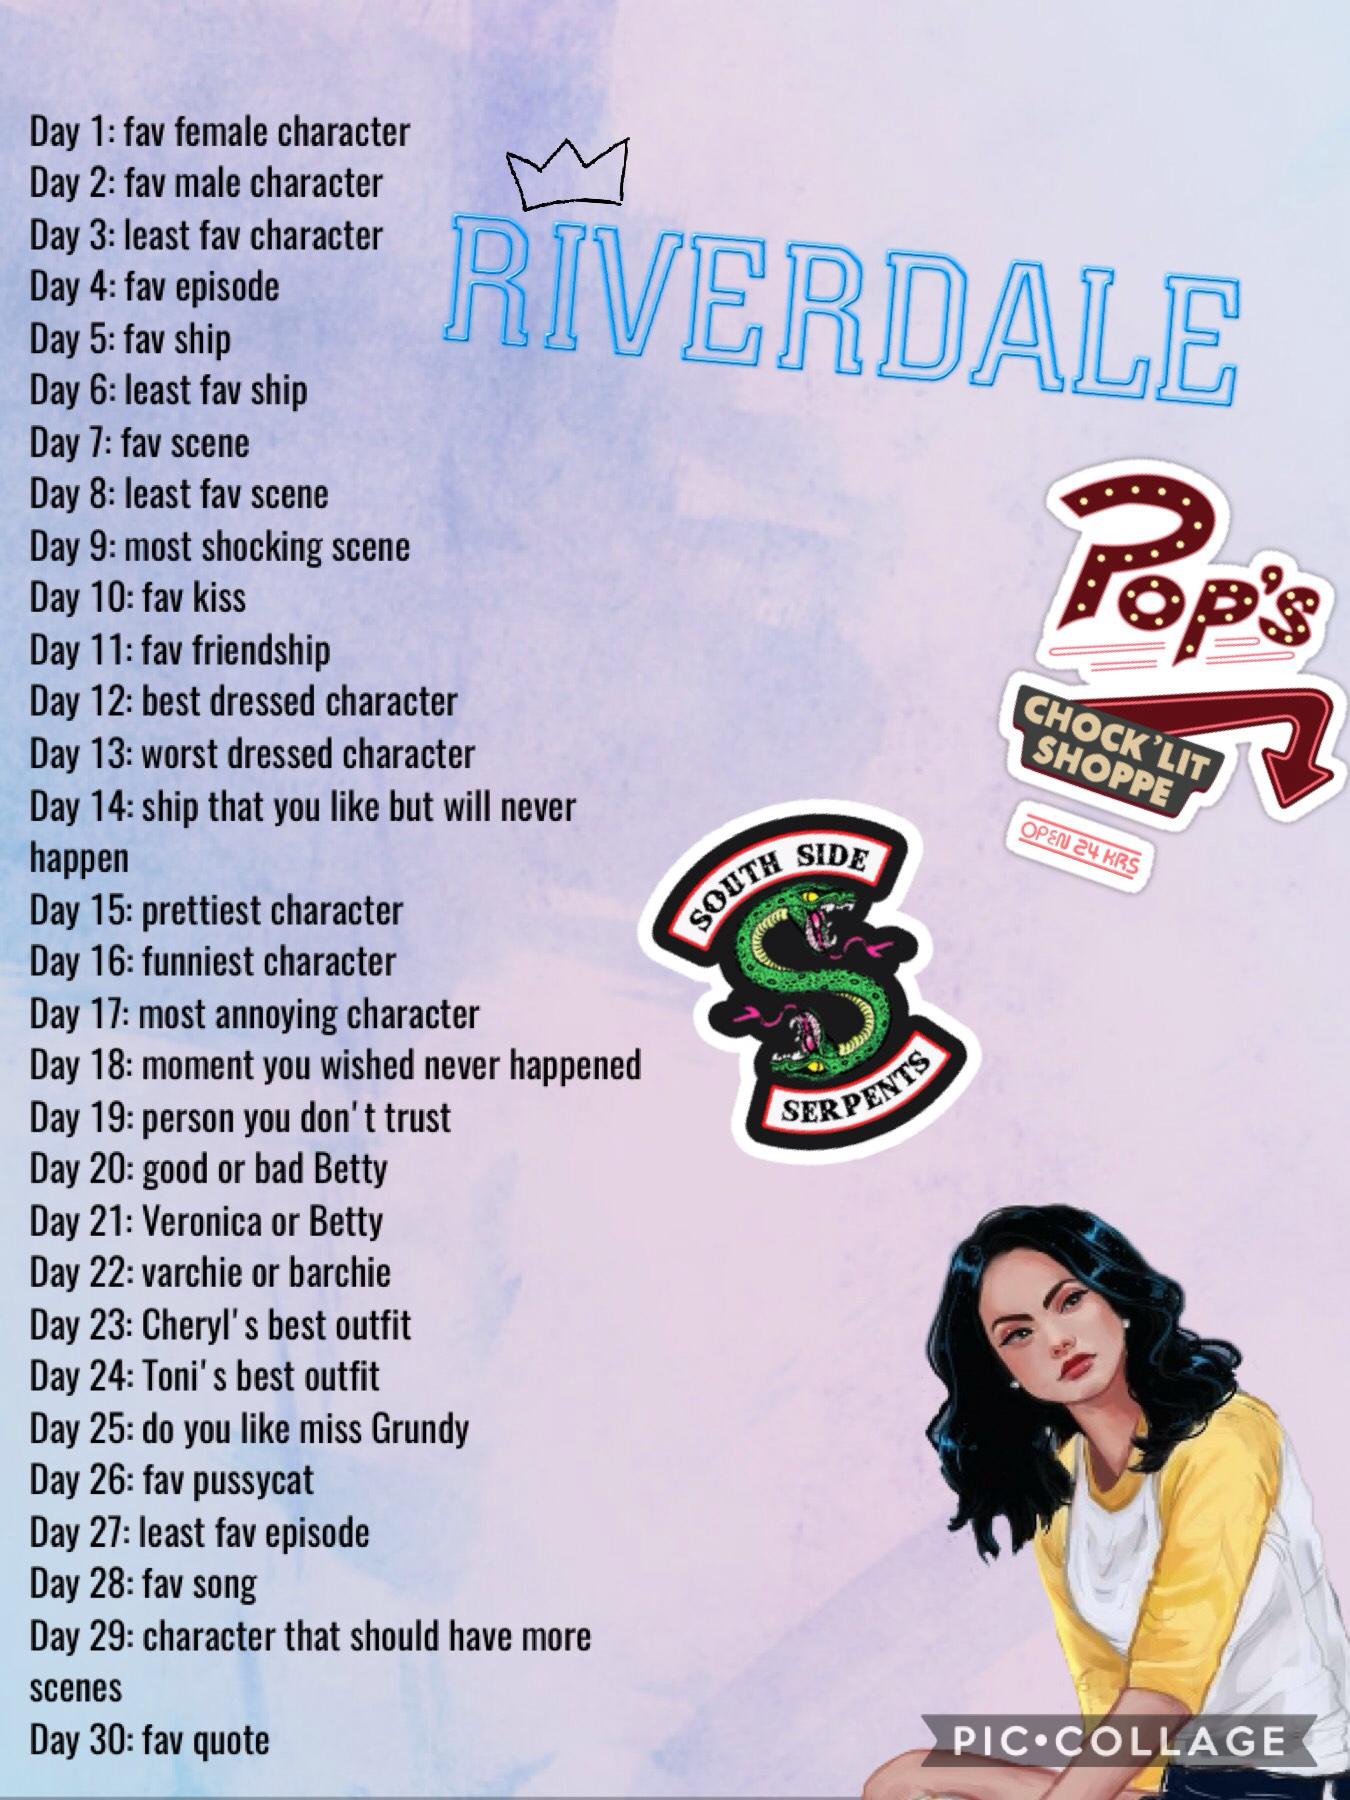 Riverdale Challenge:
Make a post that shows the answers to these questions/ shows the topic.